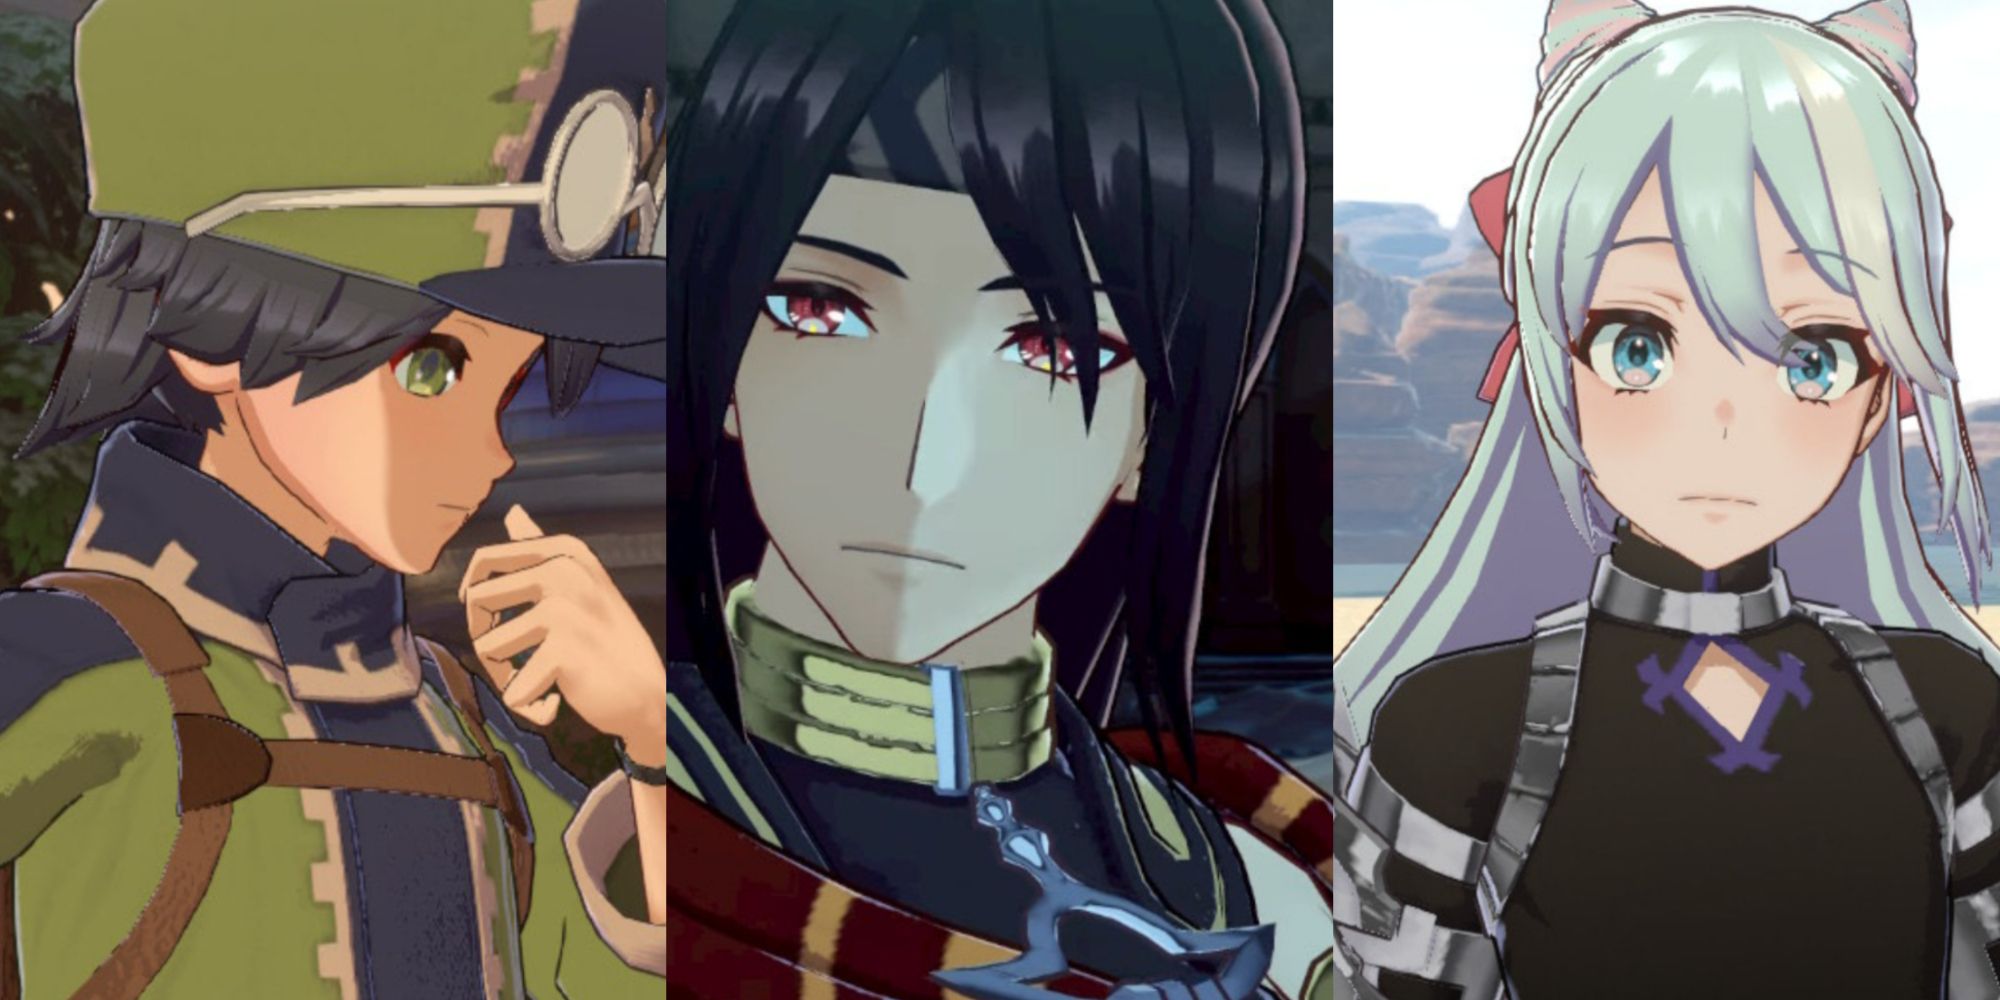 A collage of three Fire Emblem Characters: Jean, Alcryst, and Rosado